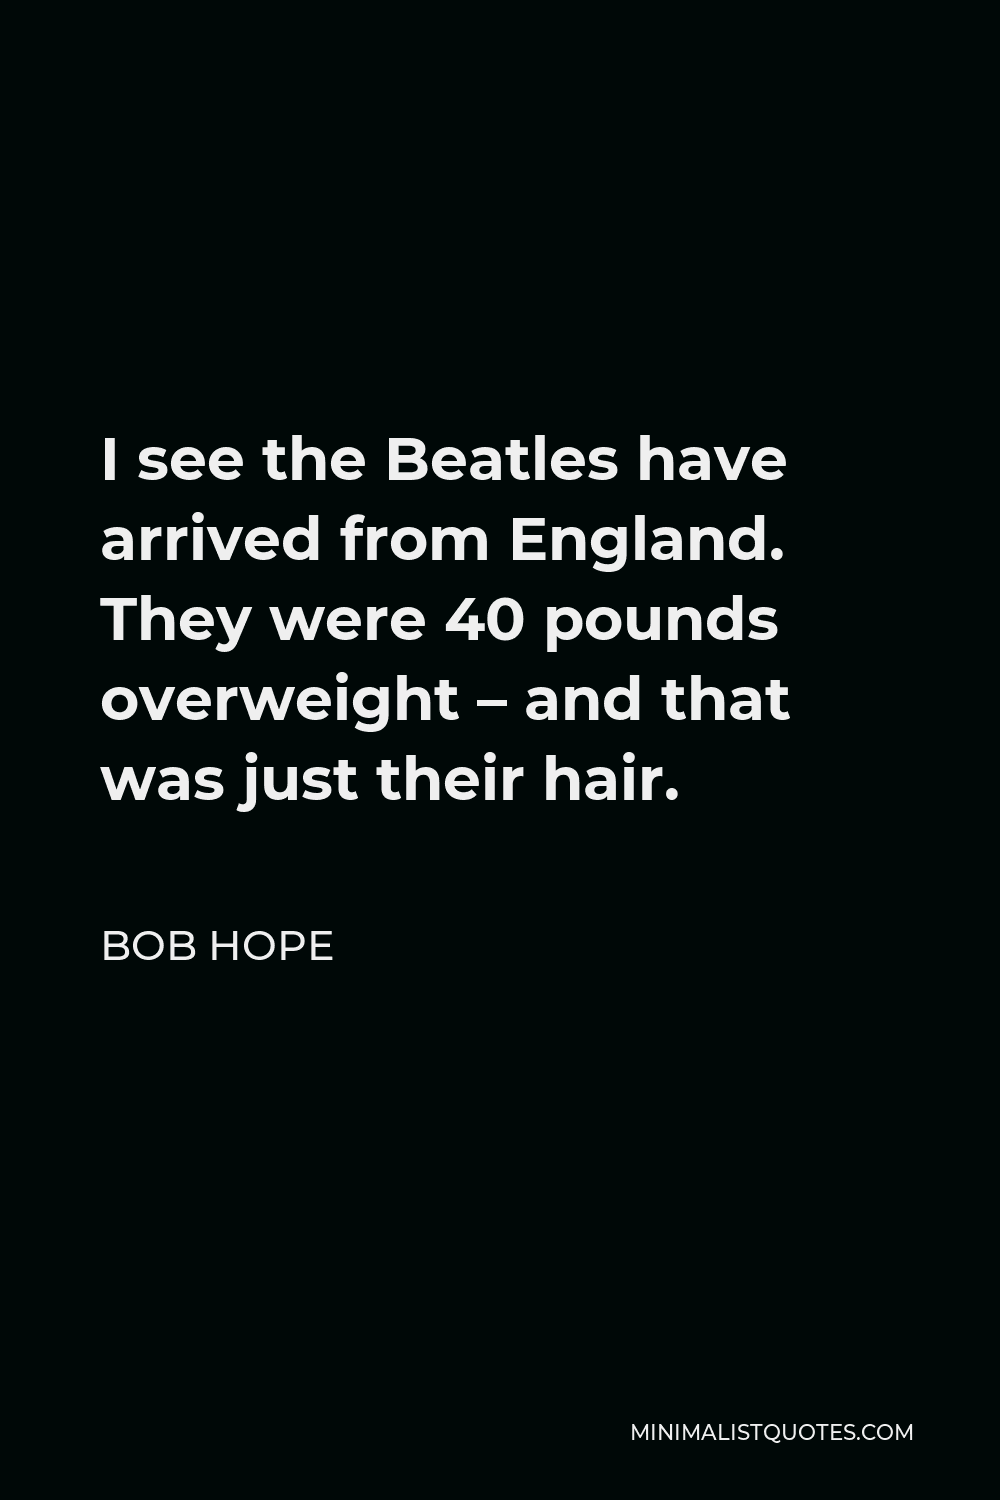 Bob Hope Quote - I see the Beatles have arrived from England. They were 40 pounds overweight – and that was just their hair.